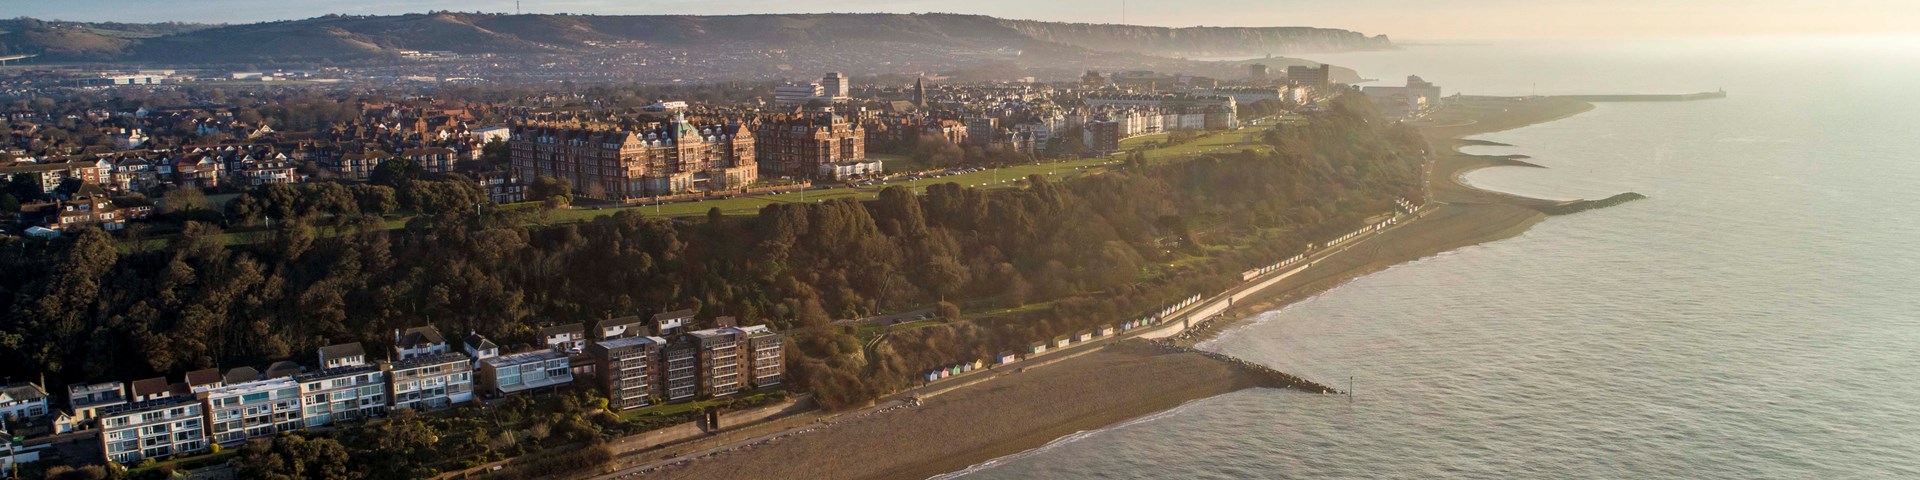 Folkestone from the air image